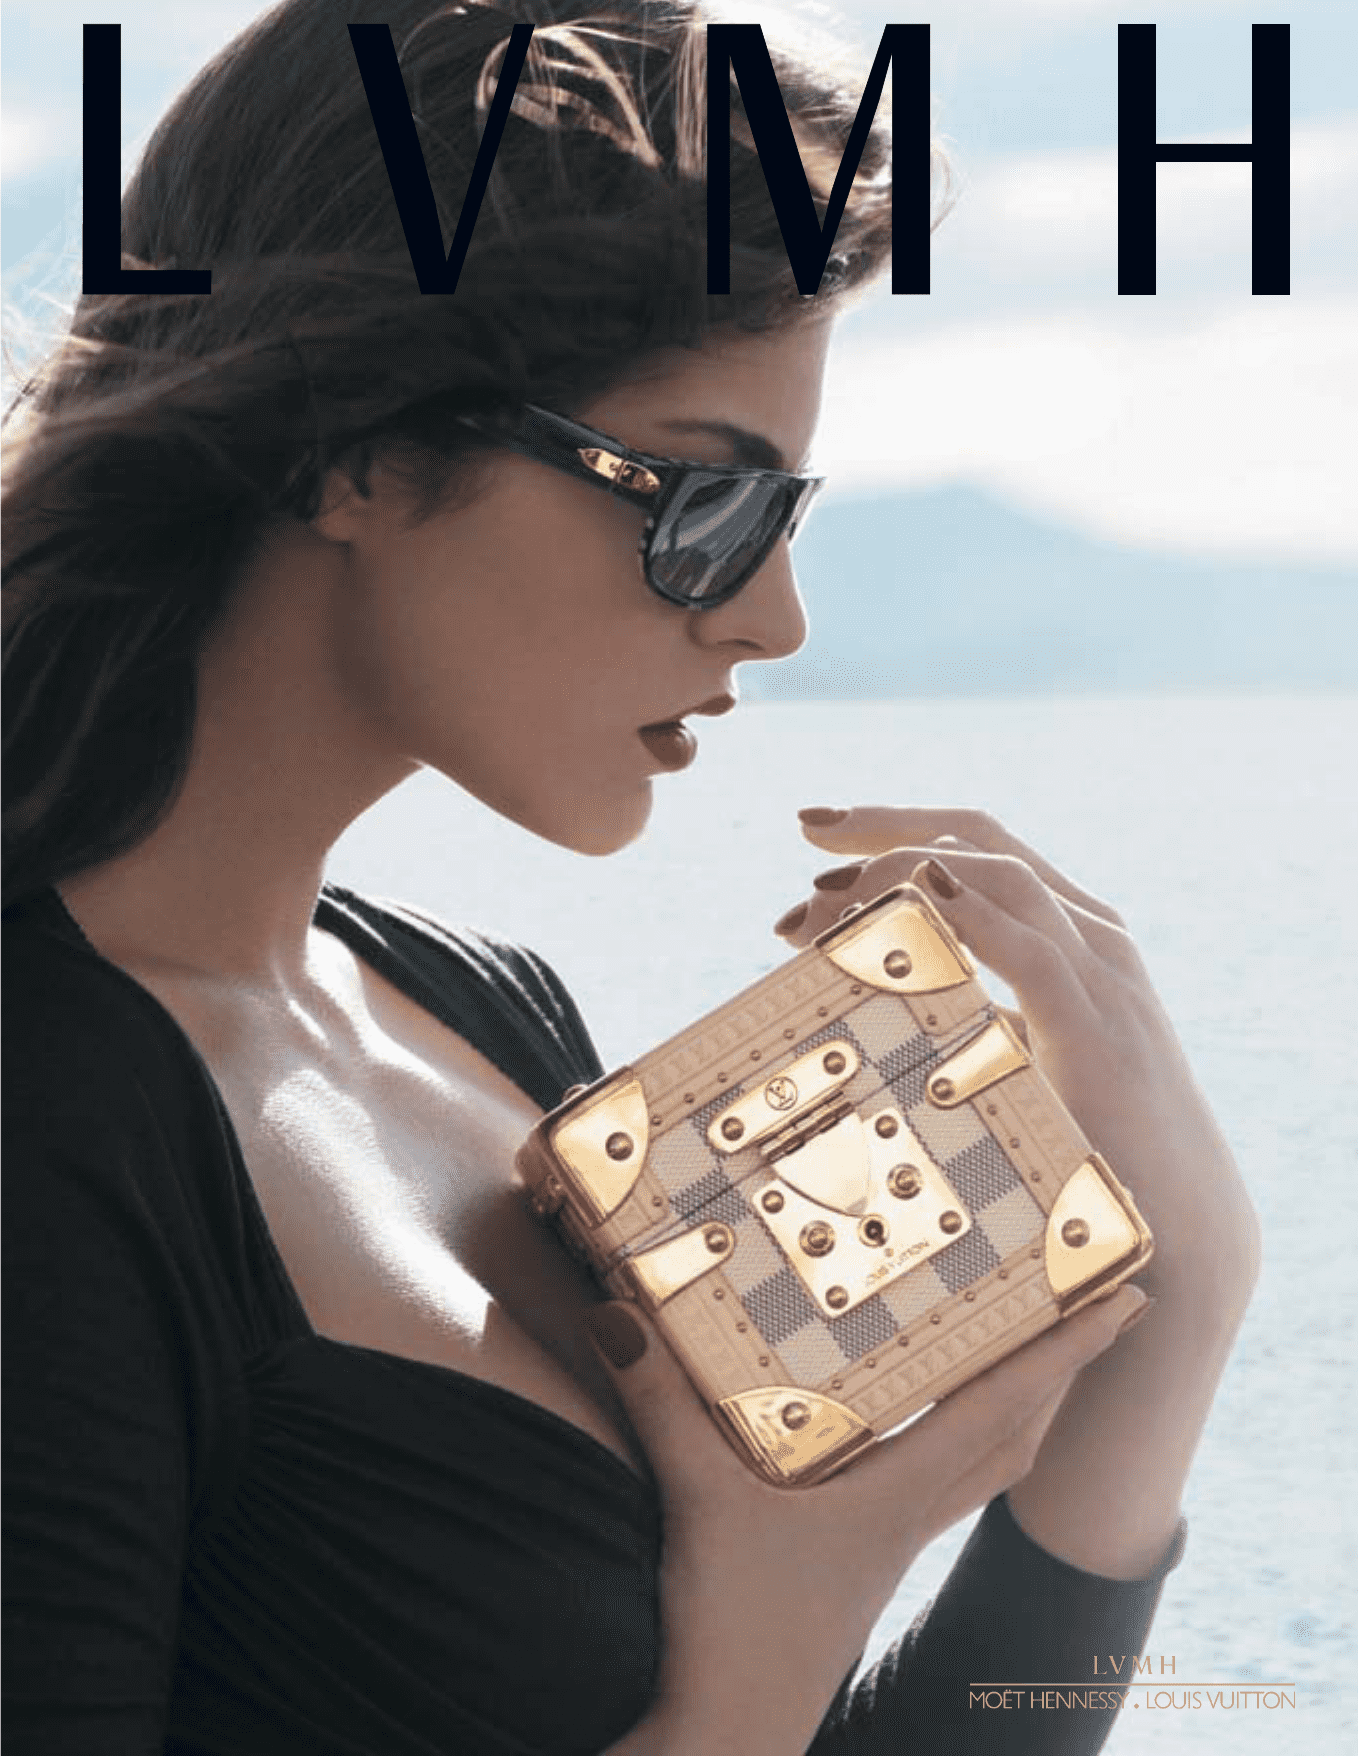 Louis Vuitton 2006 Annual Report Download